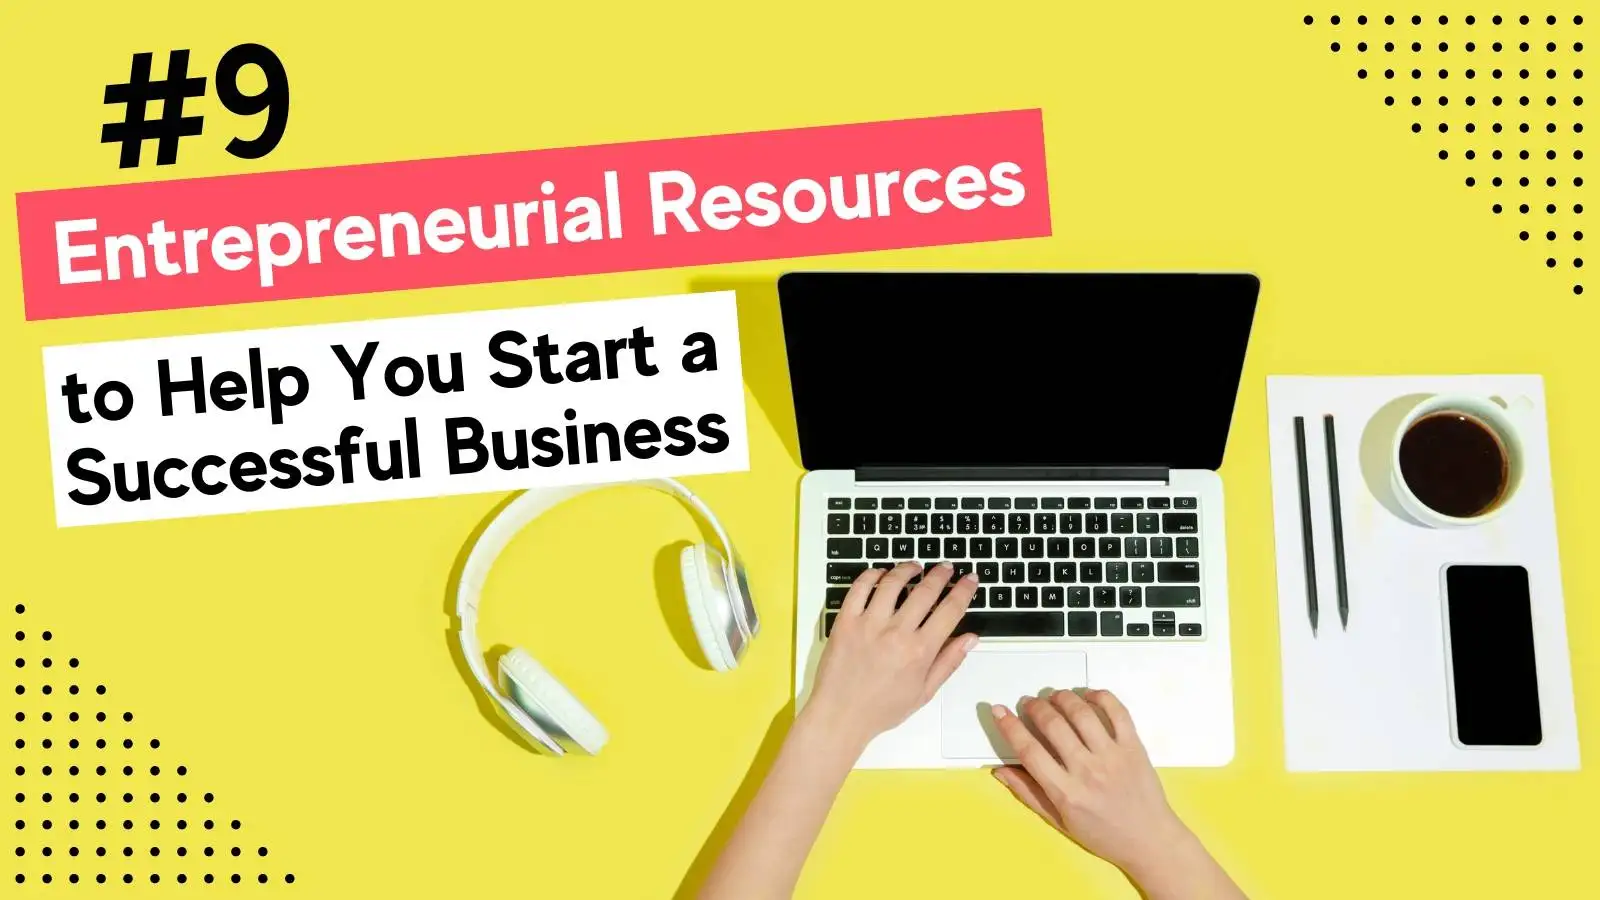 9 Entrepreneurial Resources to Help You Start a Successful Business